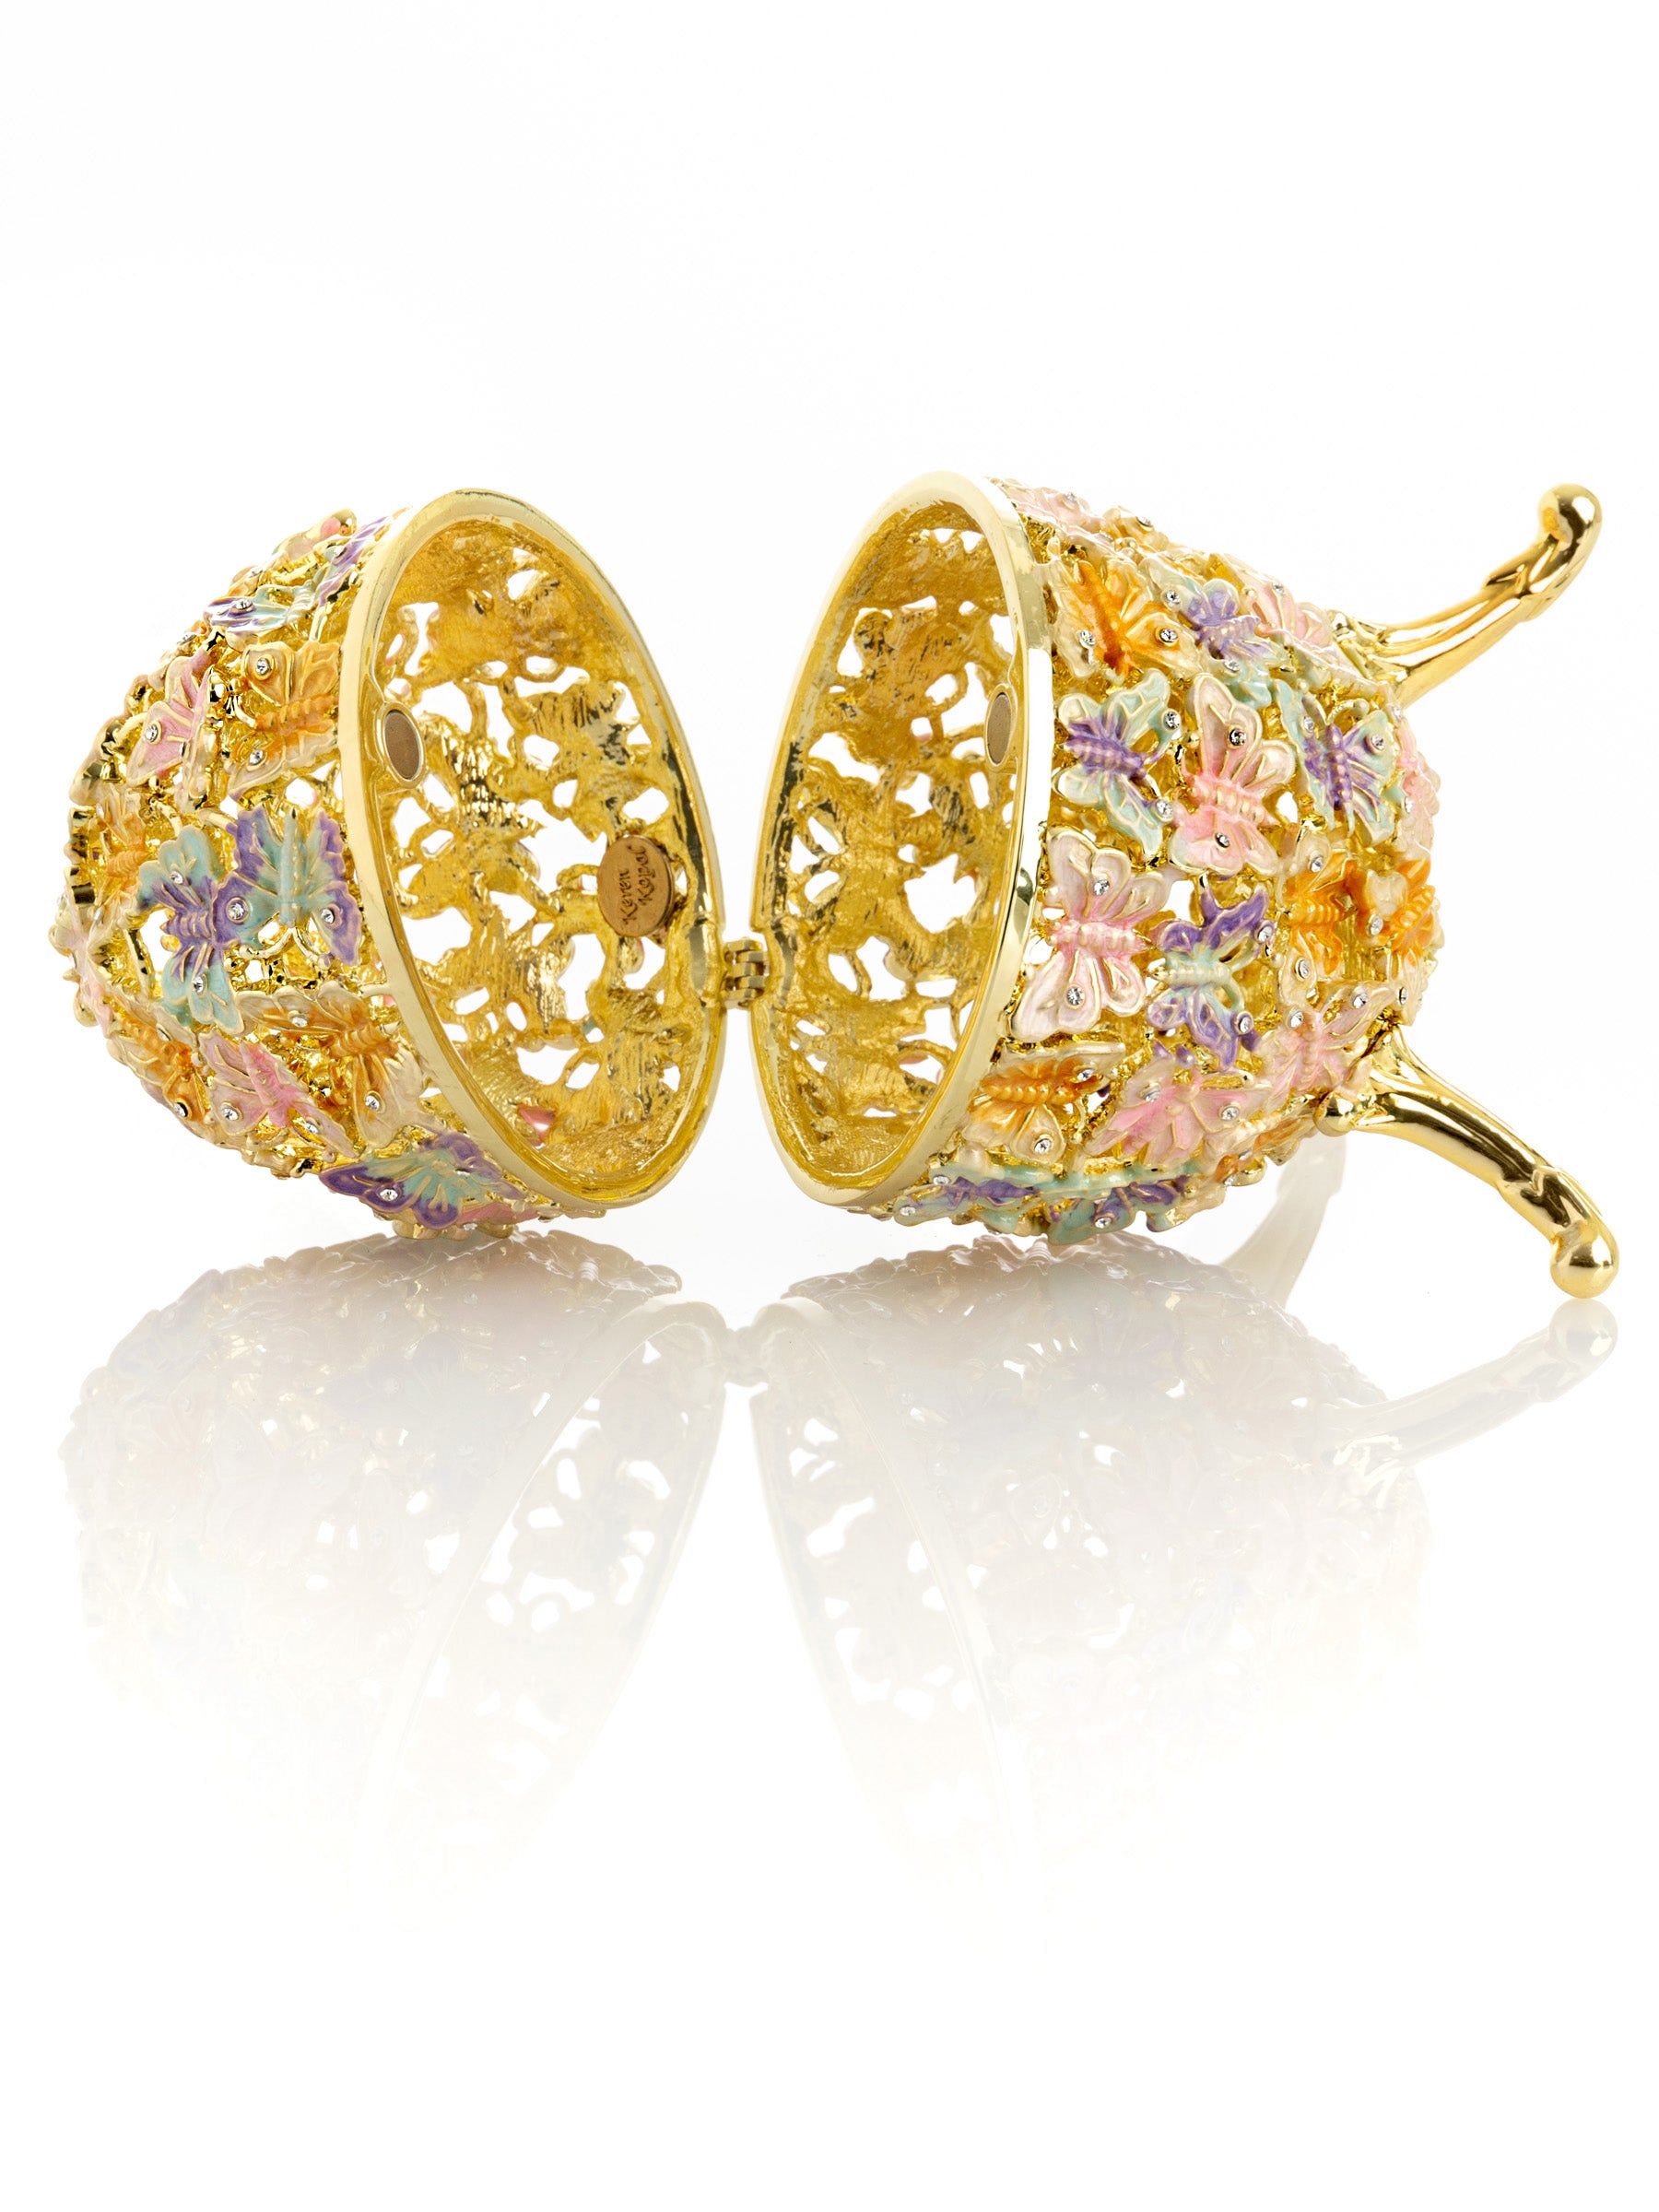 Golden Faberge Egg Decorated with Butterflies